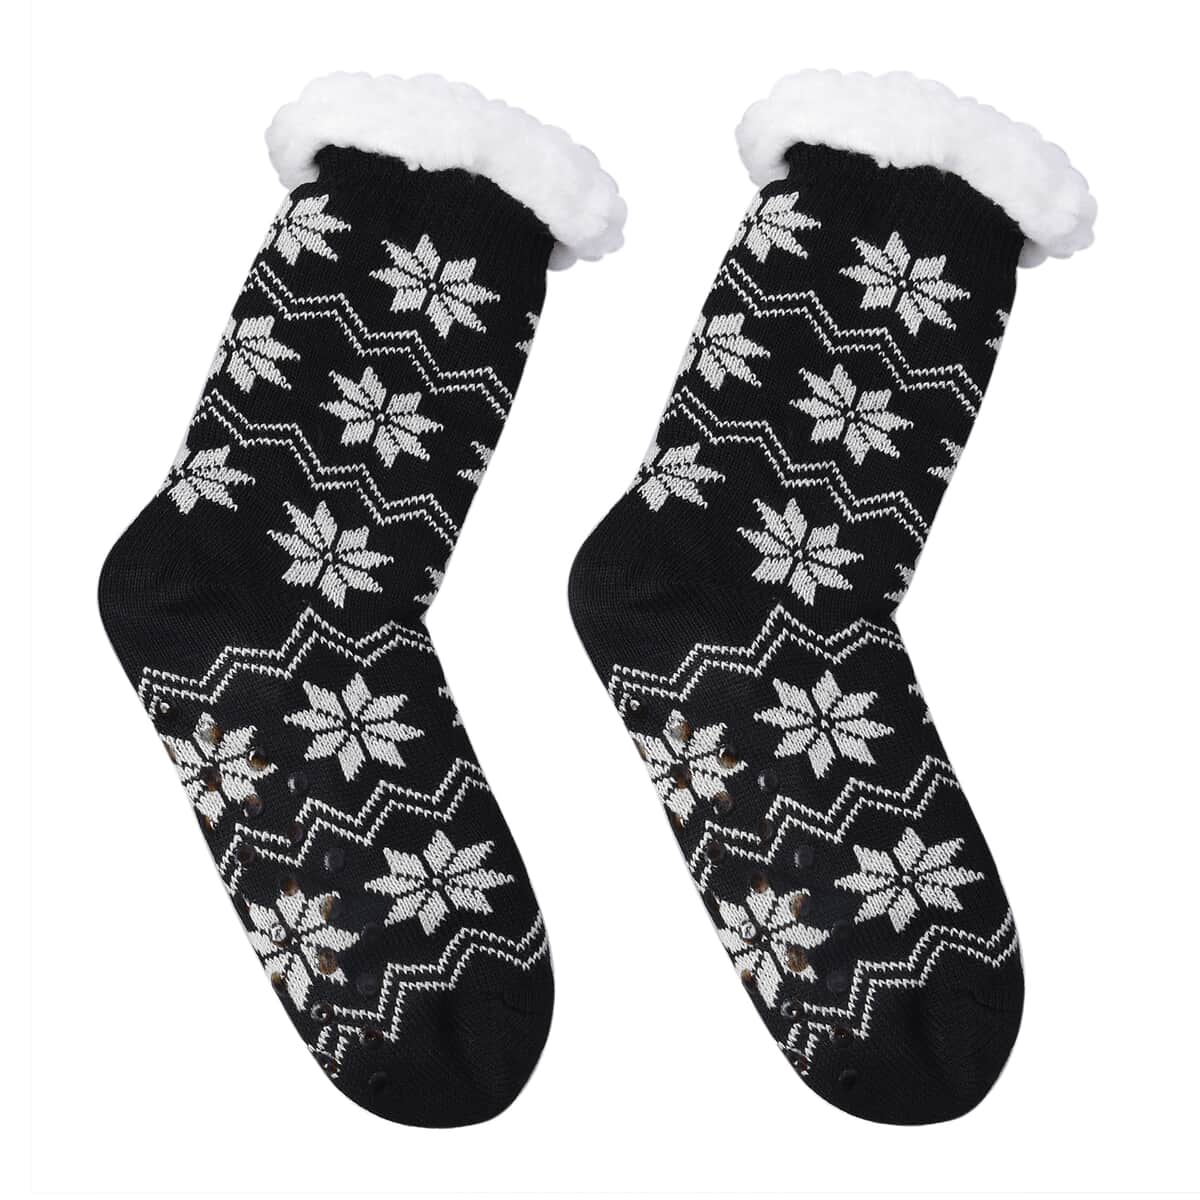 Homesmart Set of 2 Pairs White Snowflake and Navy Blue with Inside Sherpa Acrylic Knitted Socks image number 5